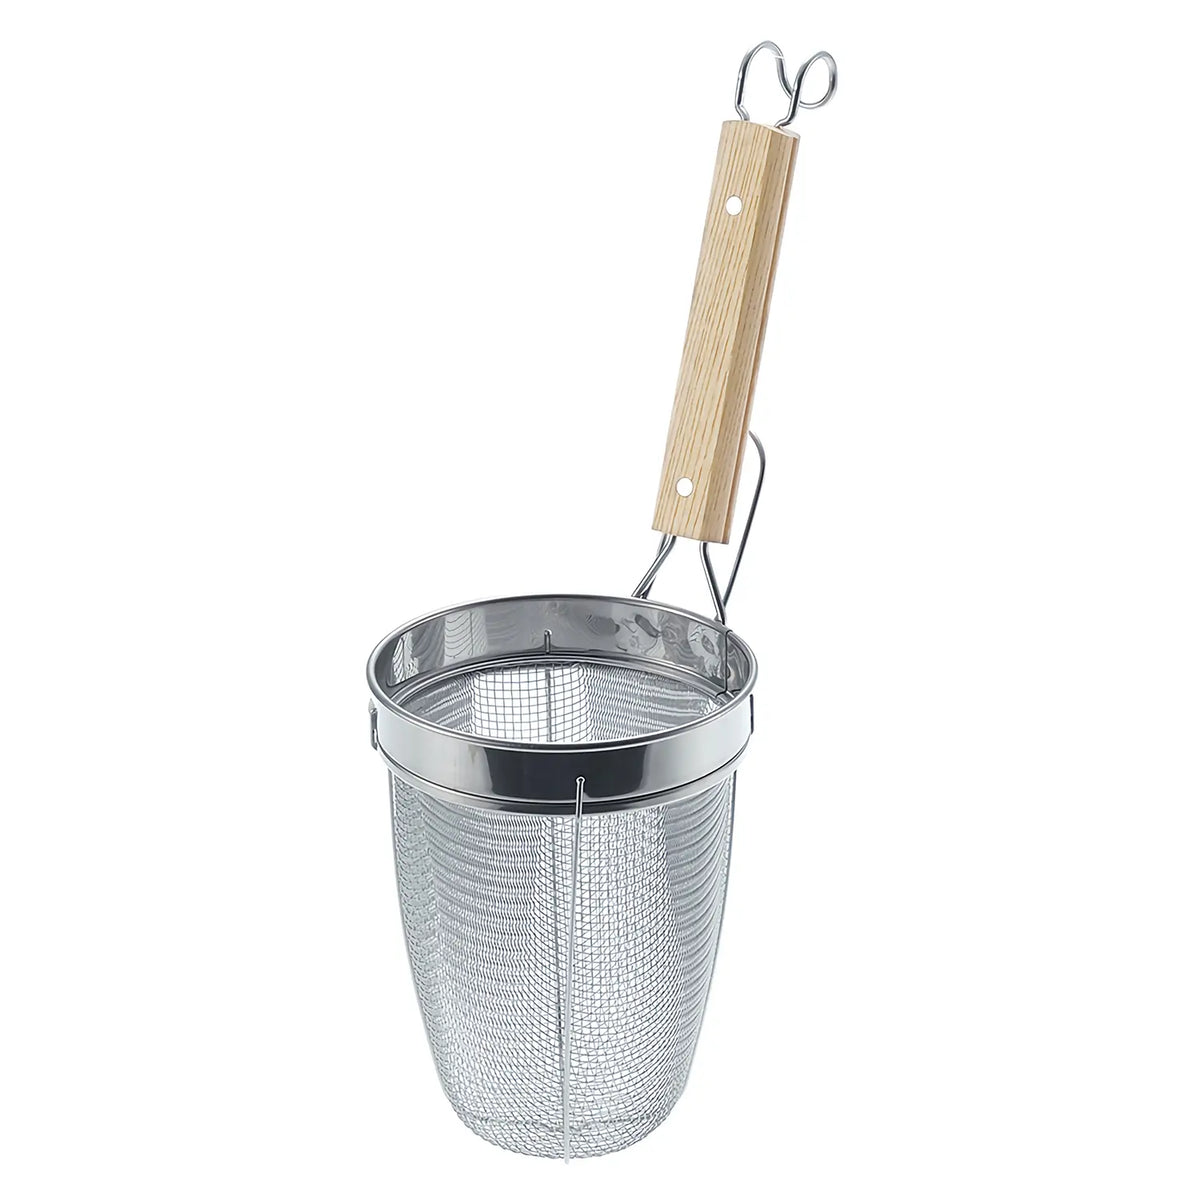 Three Snow Stainless Steel Deep Udon Tebo Noodle Strainer with Wooden Handle